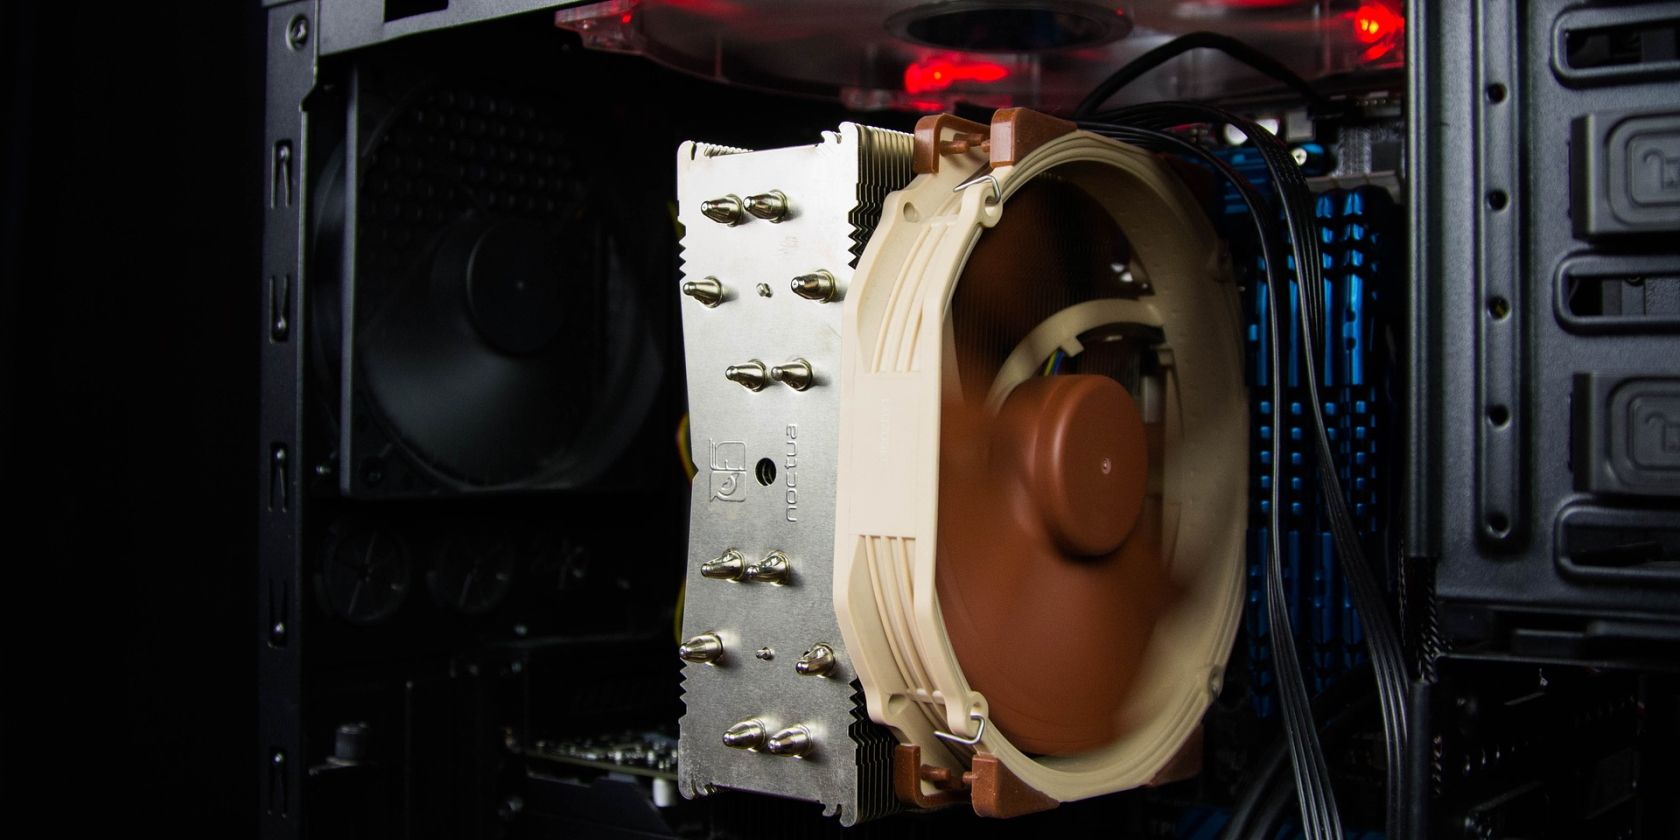 10 Common Mistakes Beginners Make When Building Their Own PC